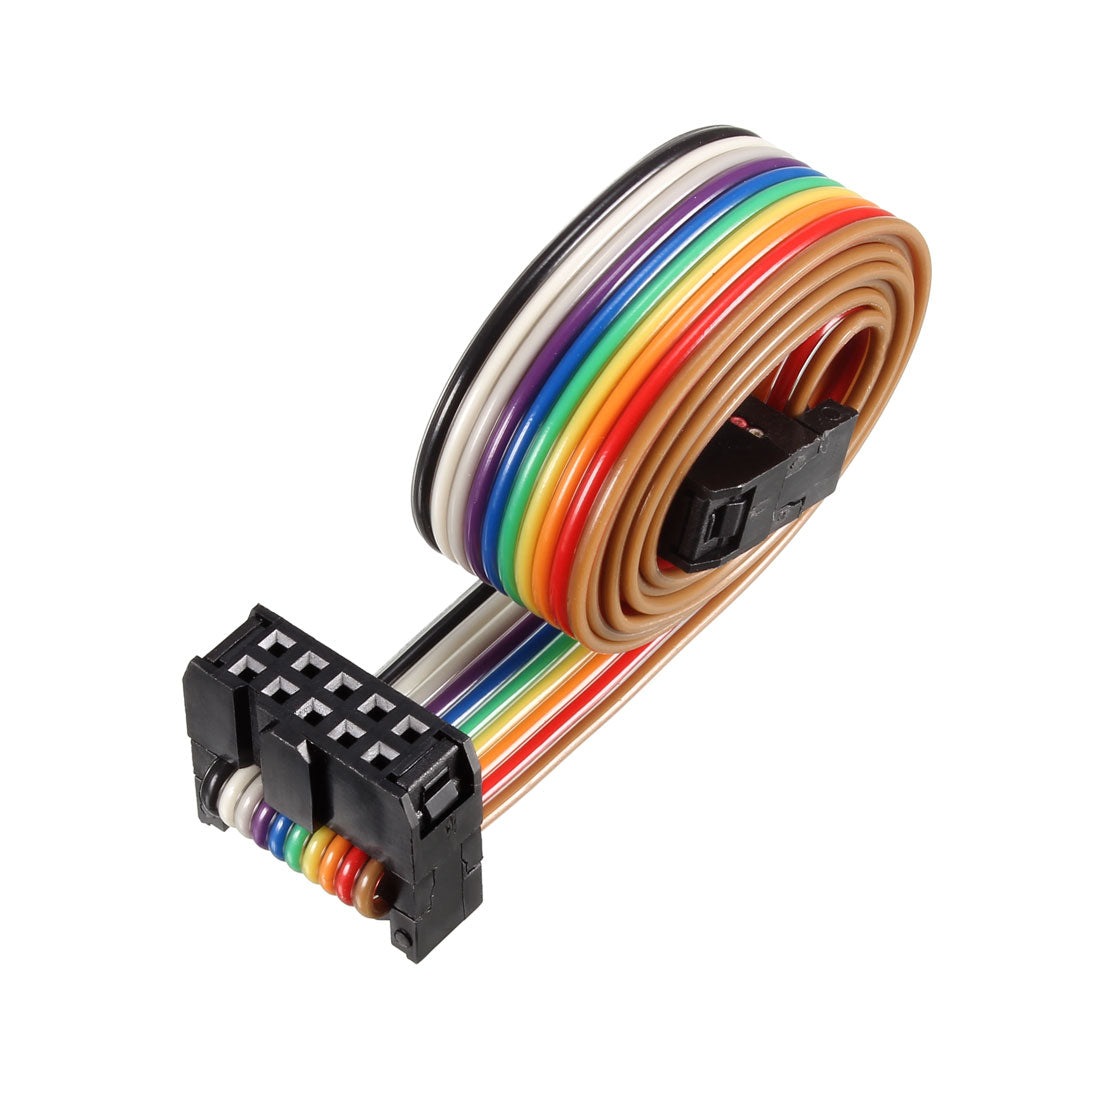 uxcell Uxcell IDC Rainbow Wire Flat Ribbon Cable 10P D-type FC/FC Connector 2.54mm Pitch 0.5m/19.7inch Length